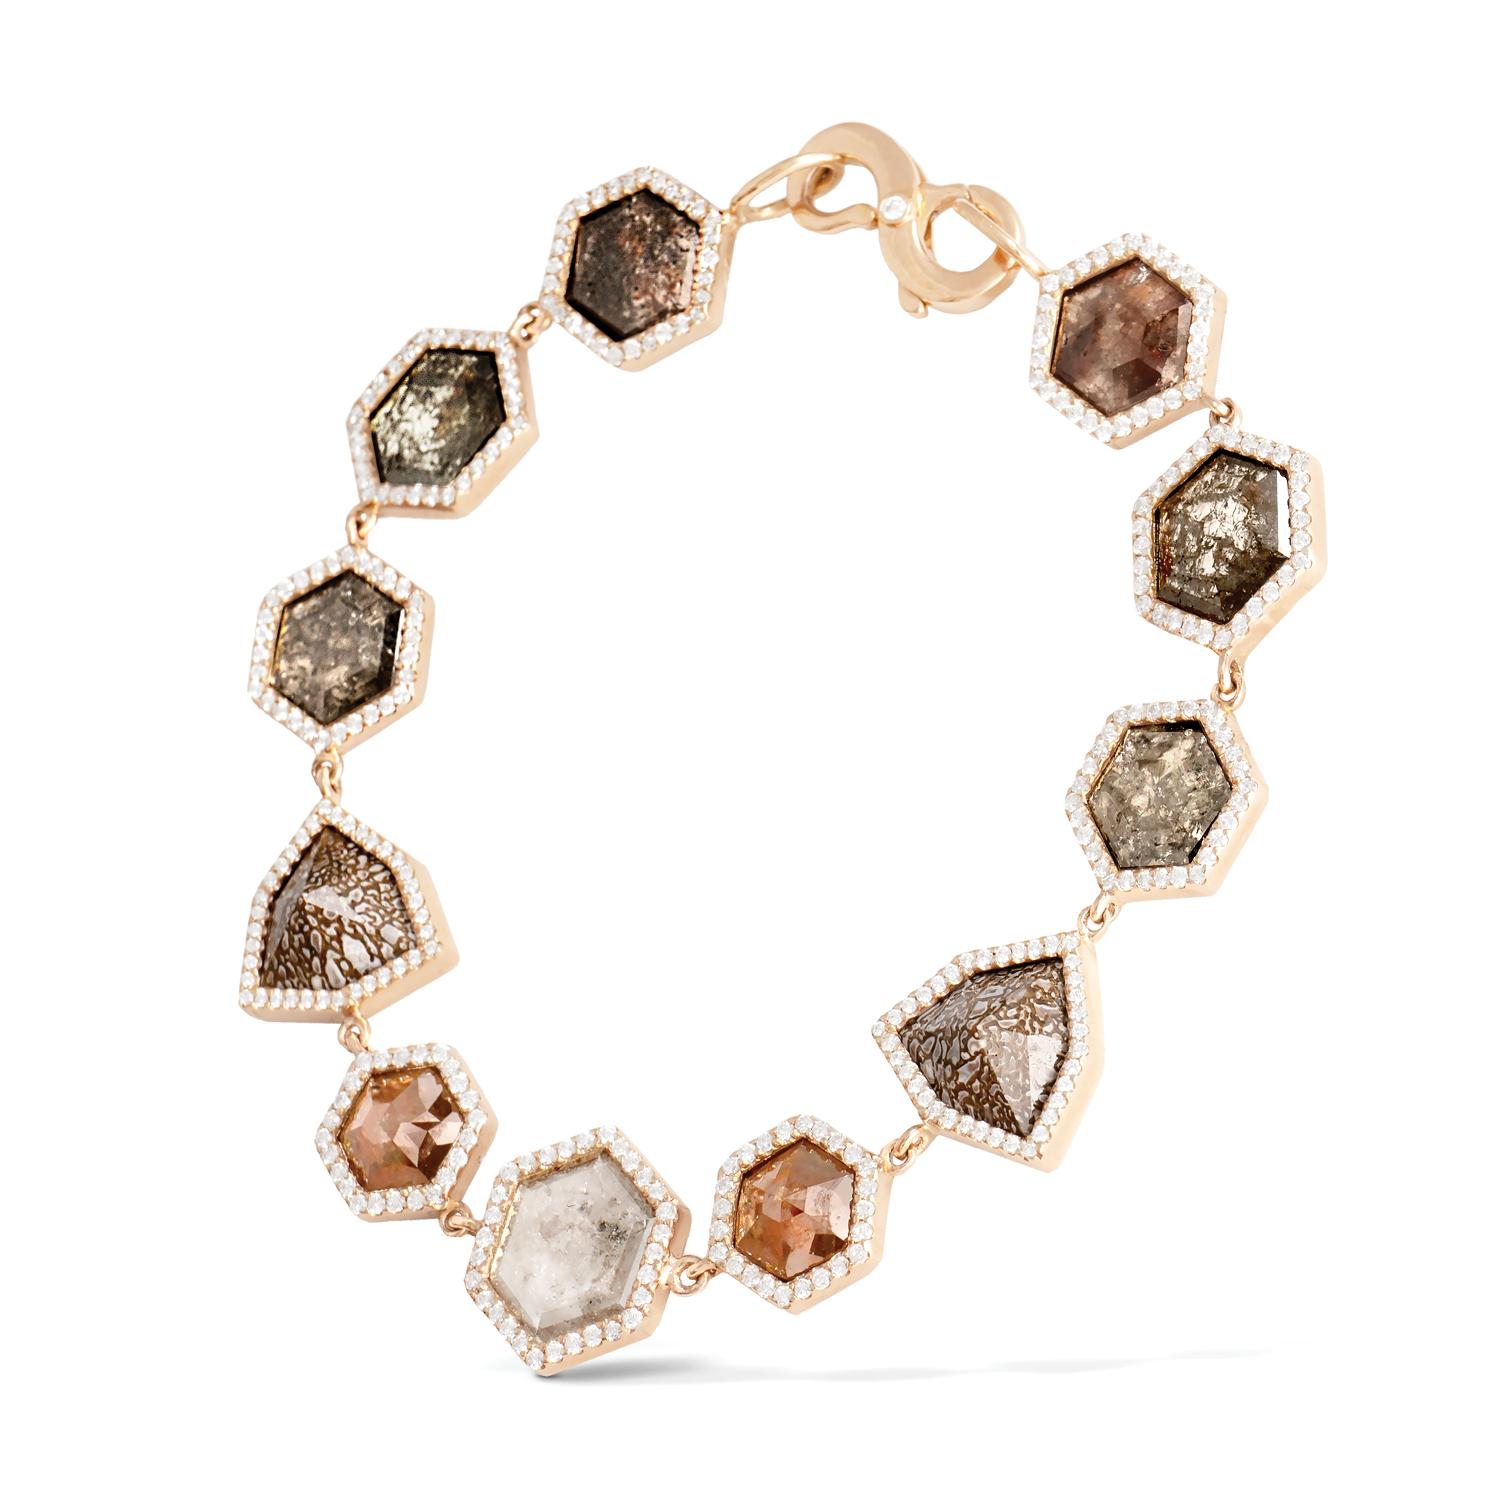 Hexagonal diamond slice and mauve fossilized dinosaur bone bracelet with white diamond pavé, 18 carat recycled rose gold, 10.95 TCW  - One-of-a-kind

Glyphs of luminescent ancient materials are serially aligned in this bracelet of 18 carat recycled